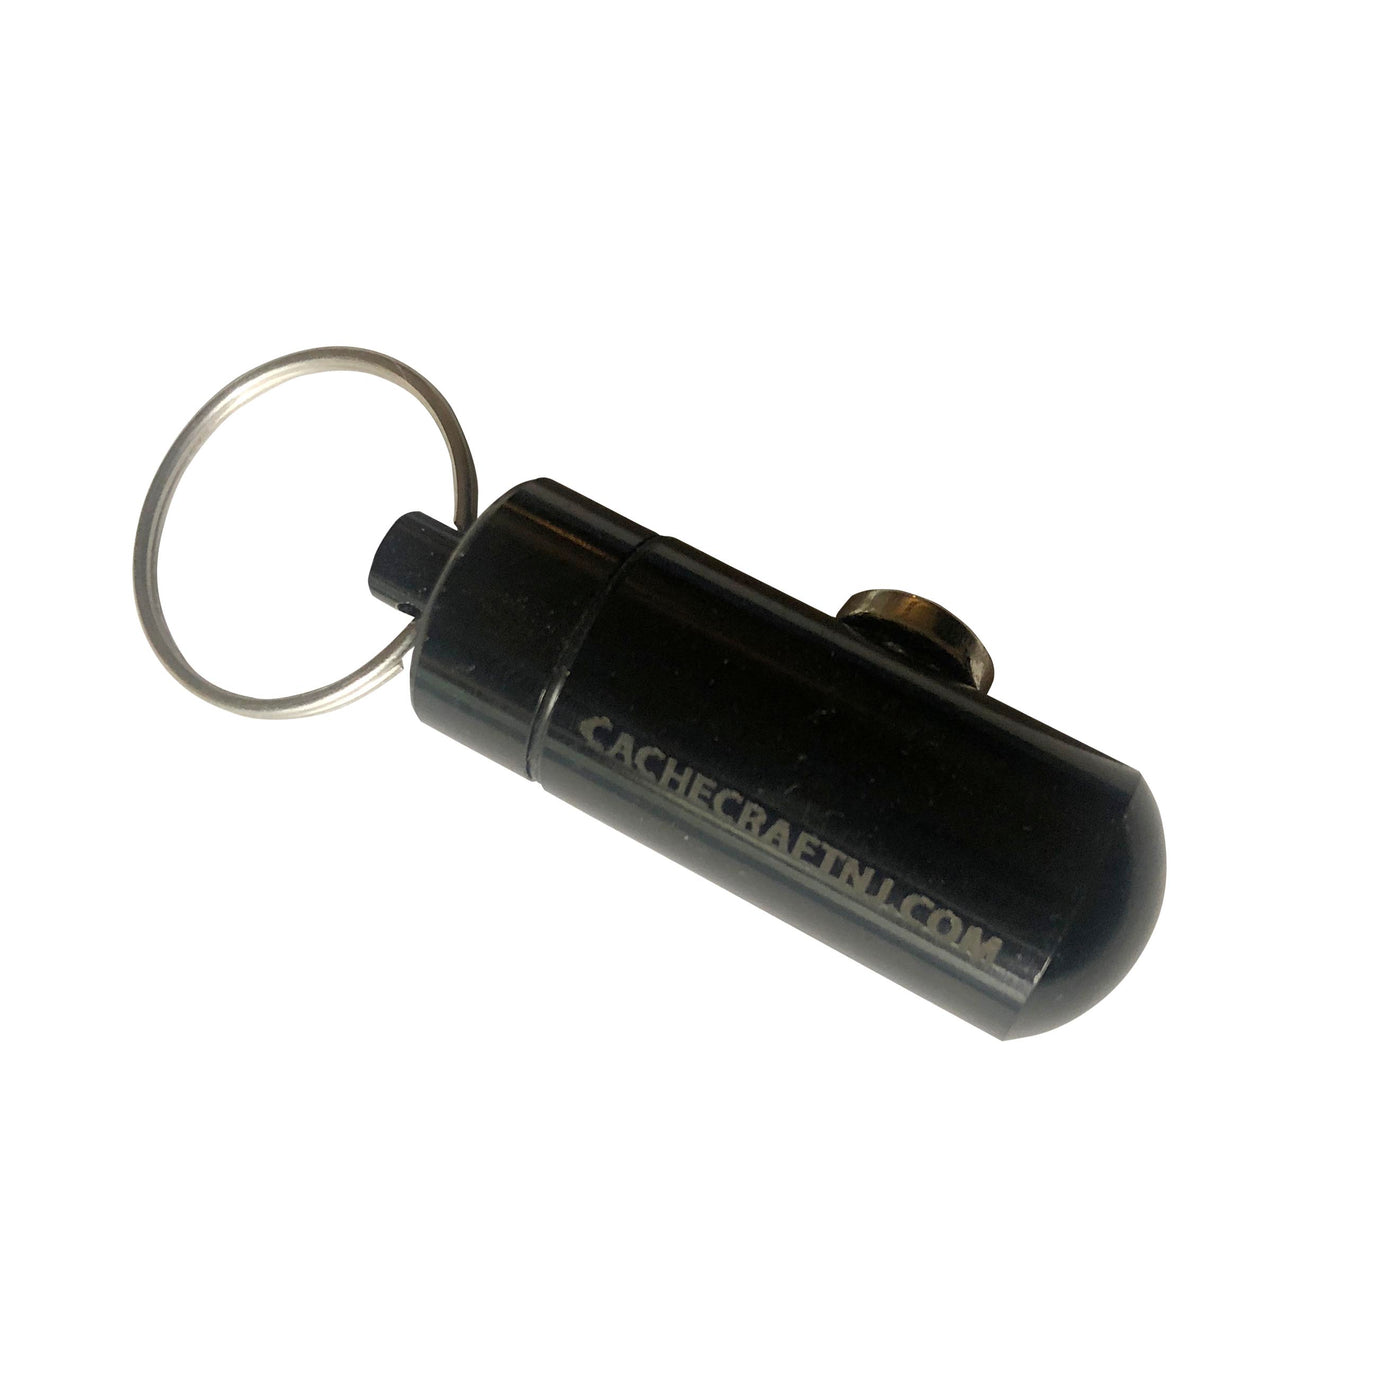 Magnetic Bison Tube Geocache Container